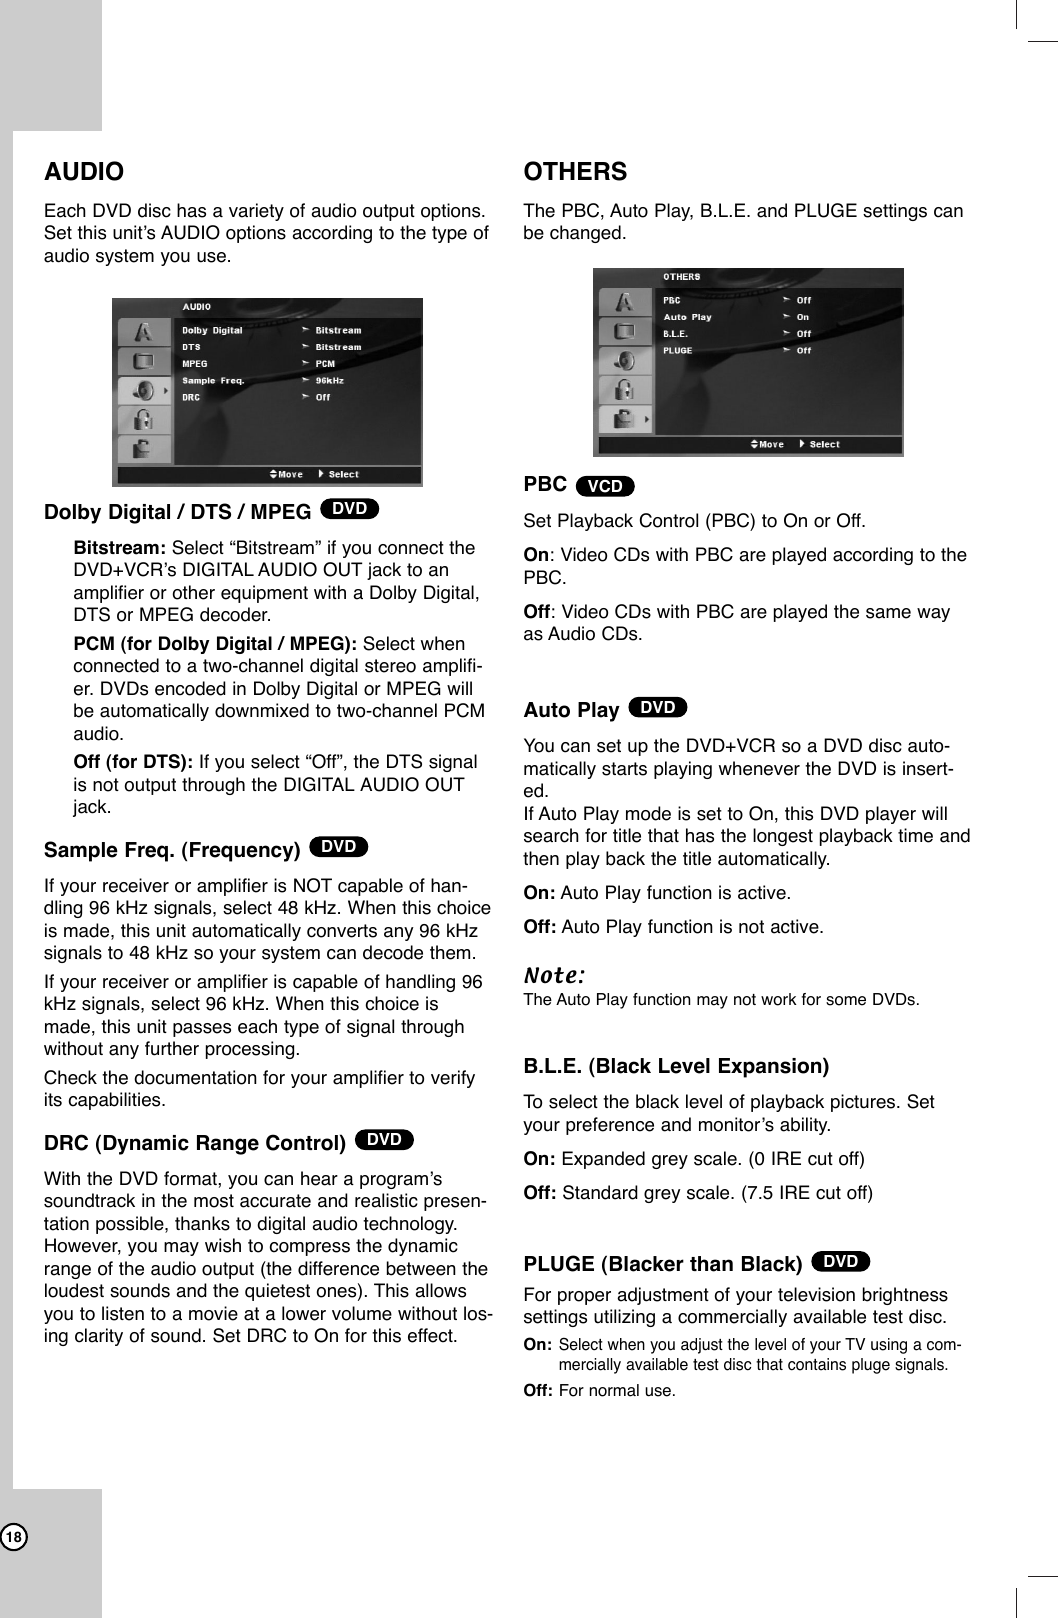 18AUDIOEach DVD disc has a variety of audio output options.Set this unit’s AUDIO options according to the type ofaudio system you use. Dolby Digital / DTS / MPEGBitstream: Select “Bitstream” if you connect theDVD+VCR’s DIGITAL AUDIO OUT jack to anamplifier or other equipment with a Dolby Digital,DTS or MPEG decoder.PCM (for Dolby Digital / MPEG): Select whenconnected to a two-channel digital stereo amplifi-er. DVDs encoded in Dolby Digital or MPEG willbe automatically downmixed to two-channel PCMaudio.Off (for DTS): If you select “Off”, the DTS signalis not output through the DIGITAL AUDIO OUTjack.Sample Freq. (Frequency)If your receiver or amplifier is NOT capable of han-dling 96 kHz signals, select 48 kHz. When this choiceis made, this unit automatically converts any 96 kHzsignals to 48 kHz so your system can decode them. If your receiver or amplifier is capable of handling 96kHz signals, select 96 kHz. When this choice ismade, this unit passes each type of signal throughwithout any further processing. Check the documentation for your amplifier to verifyits capabilities. DRC (Dynamic Range Control)With the DVD format, you can hear a program’ssoundtrack in the most accurate and realistic presen-tation possible, thanks to digital audio technology.However, you may wish to compress the dynamicrange of the audio output (the difference between theloudest sounds and the quietest ones). This allowsyou to listen to a movie at a lower volume without los-ing clarity of sound. Set DRC to On for this effect.OTHERSThe PBC, Auto Play, B.L.E. and PLUGE settings canbe changed. PBCSet Playback Control (PBC) to On or Off.On: Video CDs with PBC are played according to thePBC.Off: Video CDs with PBC are played the same wayas Audio CDs.Auto Play You can set up the DVD+VCR so a DVD disc auto-matically starts playing whenever the DVD is insert-ed.If Auto Play mode is set to On, this DVD player willsearch for title that has the longest playback time andthen play back the title automatically.On: Auto Play function is active.Off: Auto Play function is not active.Note:The Auto Play function may not work for some DVDs.B.L.E. (Black Level Expansion)To  select the black level of playback pictures. Setyour preference and monitor’s ability.On: Expanded grey scale. (0 IRE cut off)Off: Standard grey scale. (7.5 IRE cut off)PLUGE (Blacker than Black) For proper adjustment of your television brightness settings utilizing a commercially available test disc.On:Select when you adjust the level of your TV using a com-mercially available test disc that contains pluge signals.Off: For normal use.DVDDVDVCDDVDDVDDVD